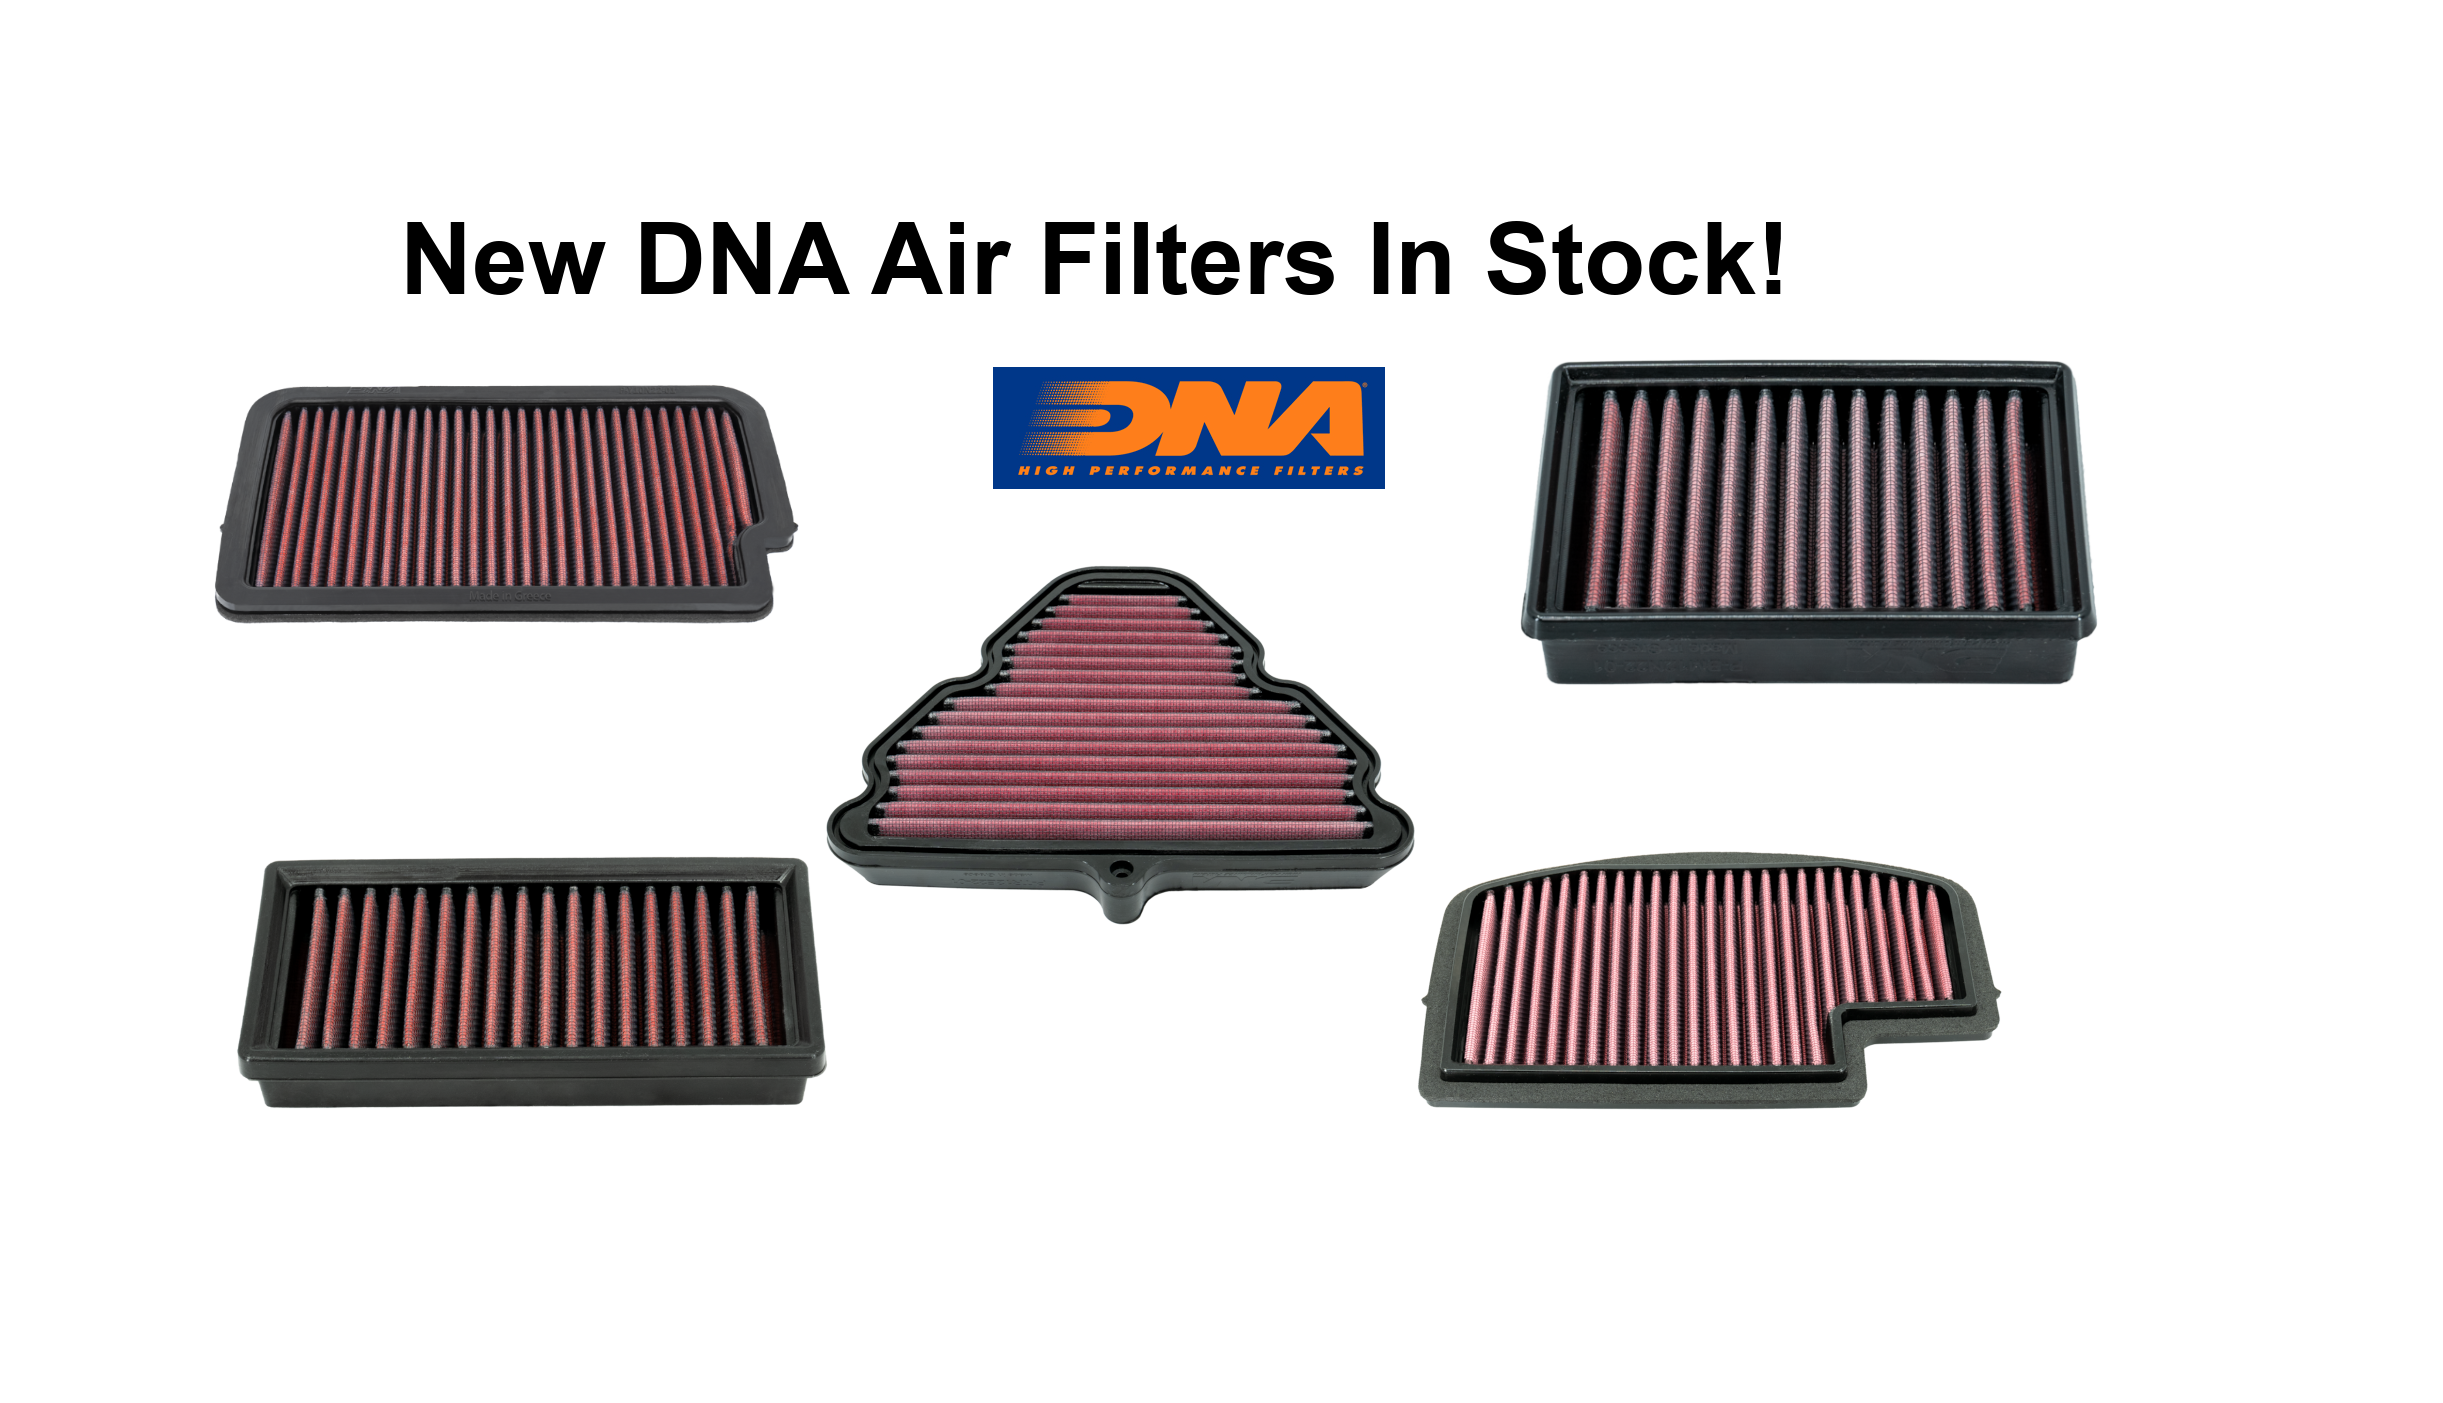 New DNA air filters available for Yamaha, Ducati, BMW, And Trumph Motorcycles